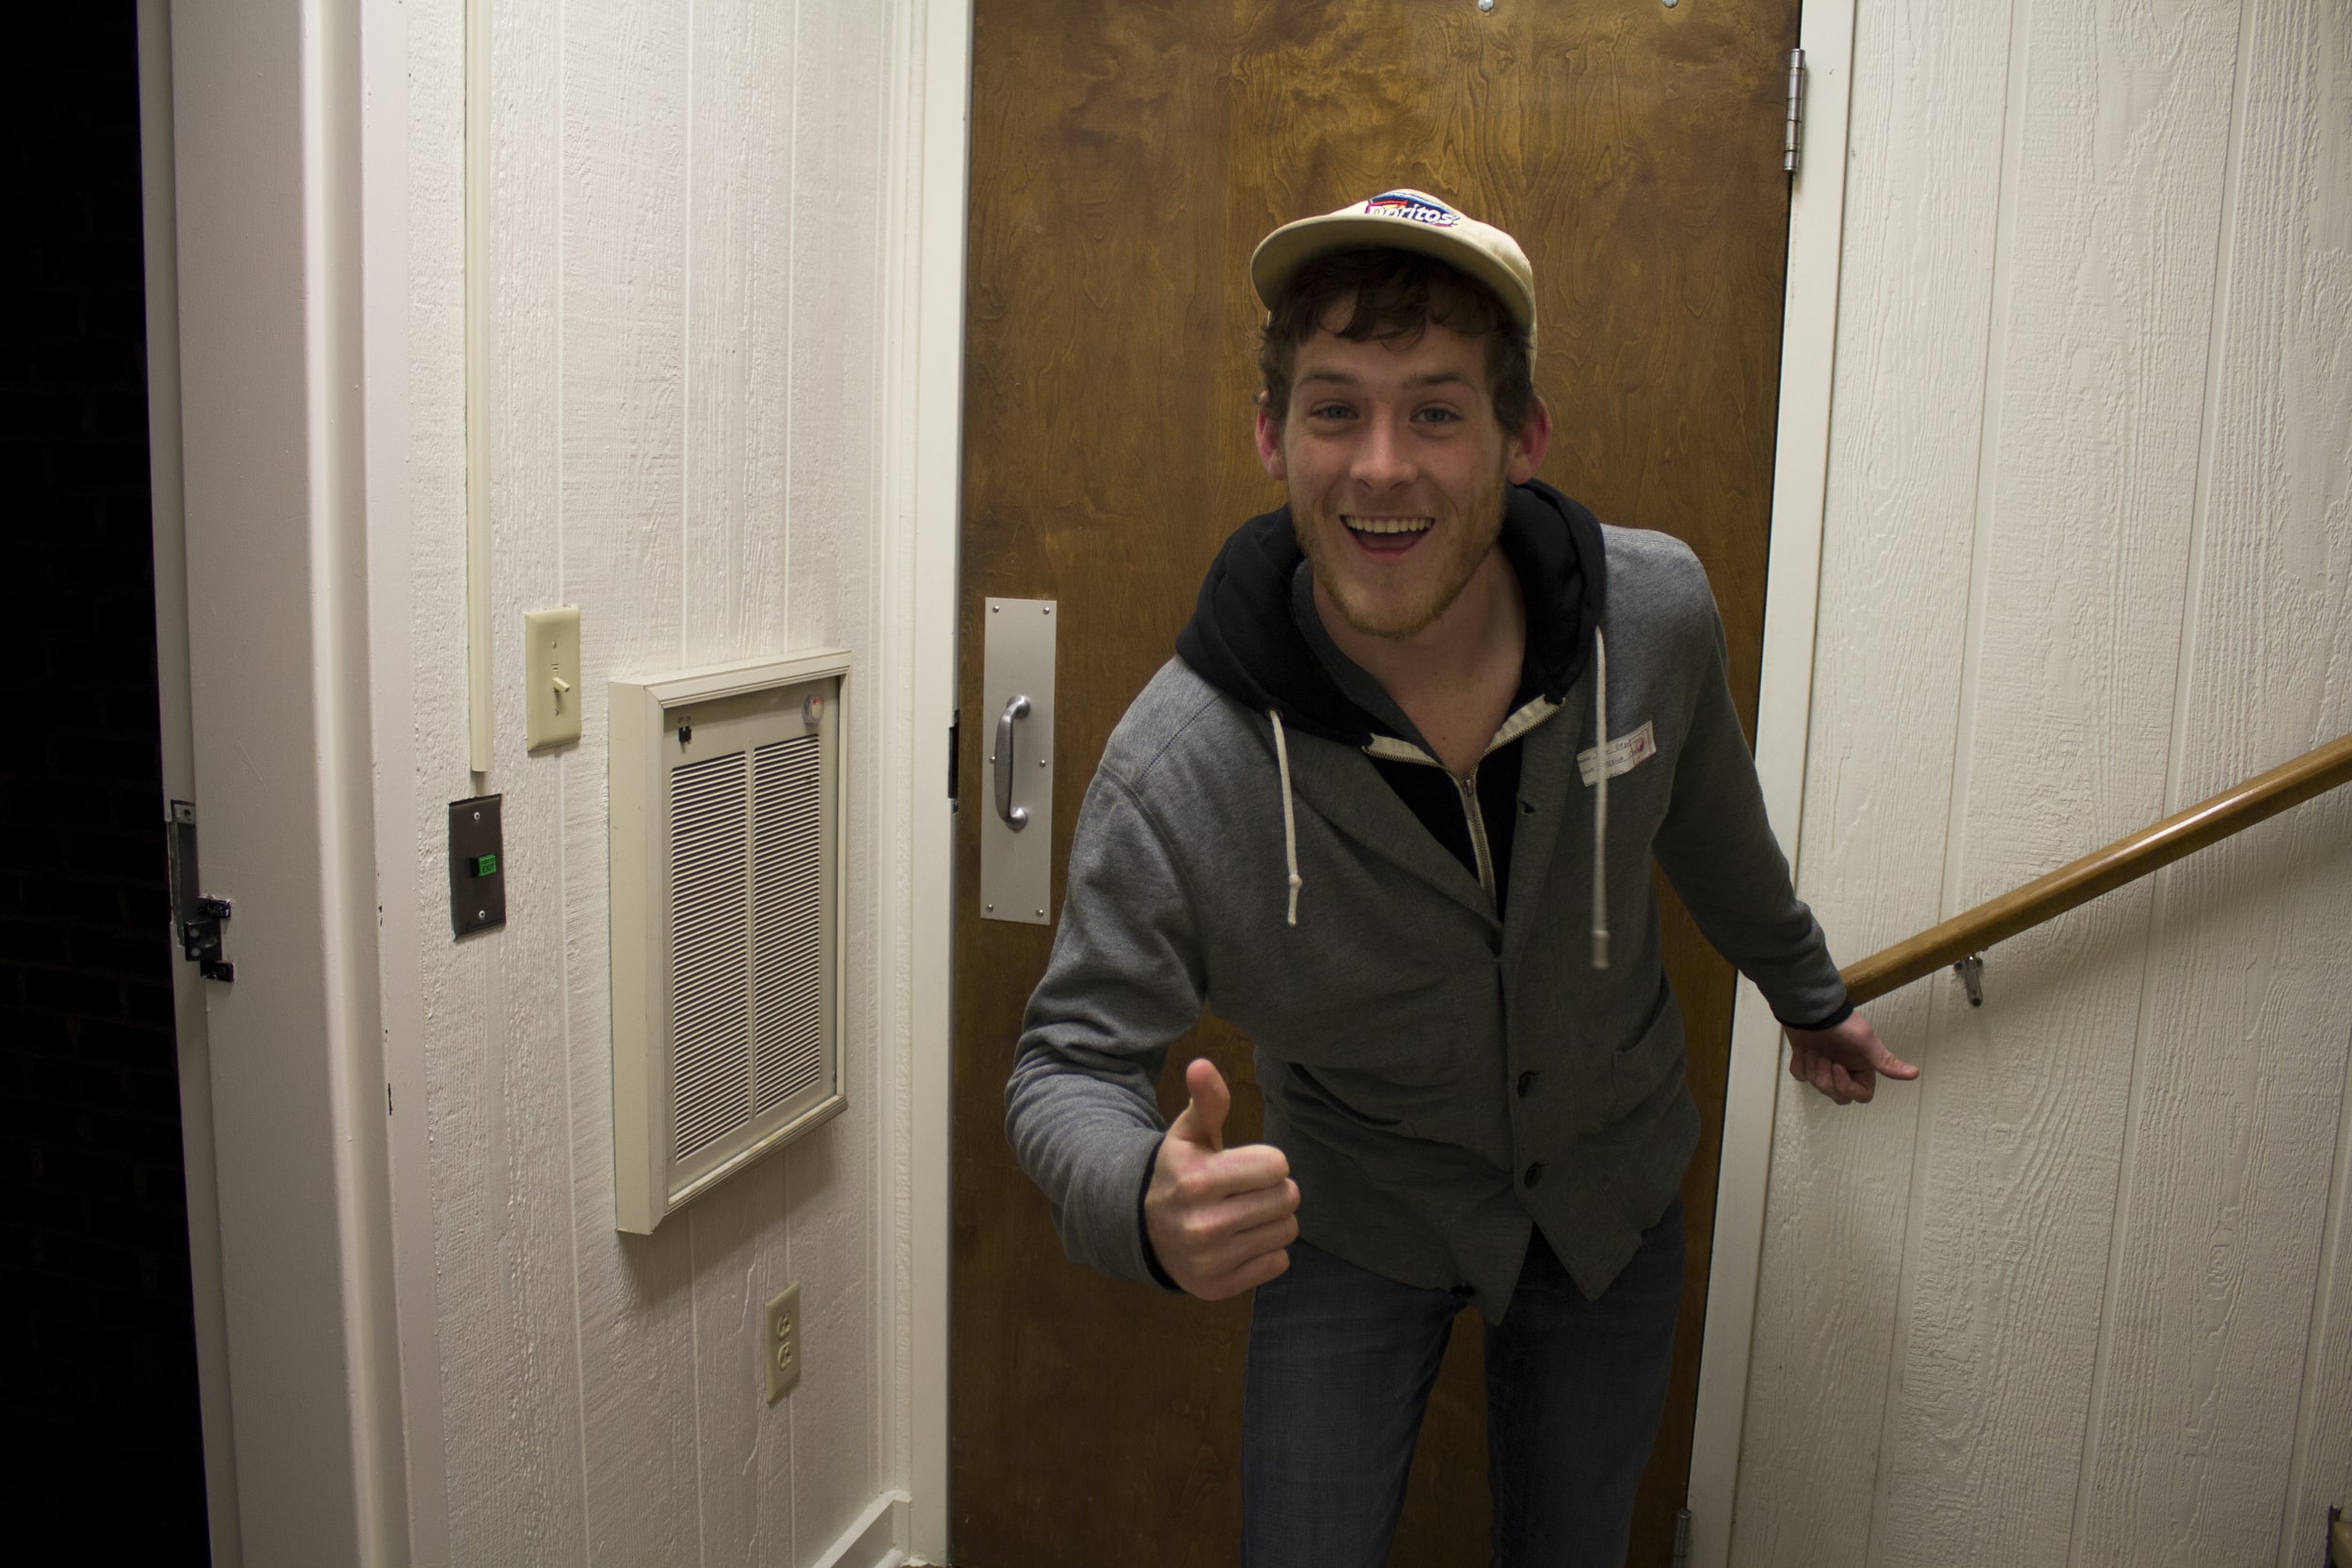  Junior Tyler Ezsol gives his thumbs up approval on the open dorm evening on his way to visit some friends down the hall.&nbsp; 